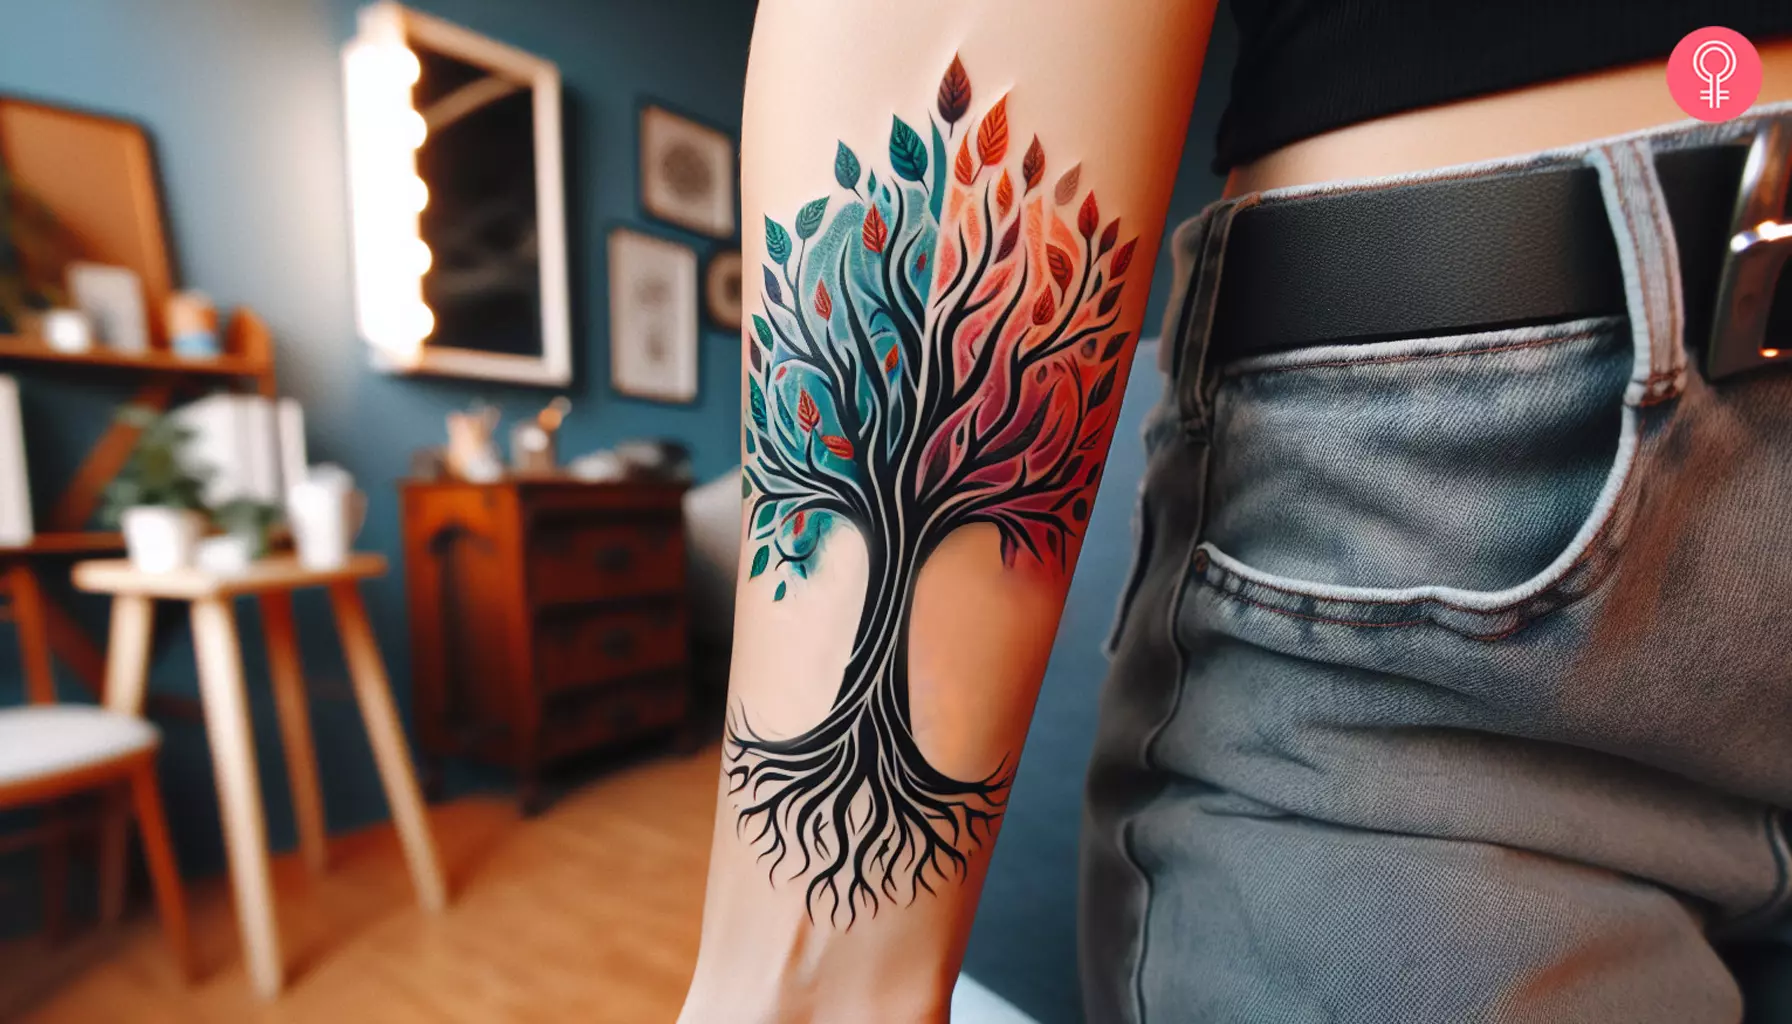 A life and death tree tattoo on the forearm